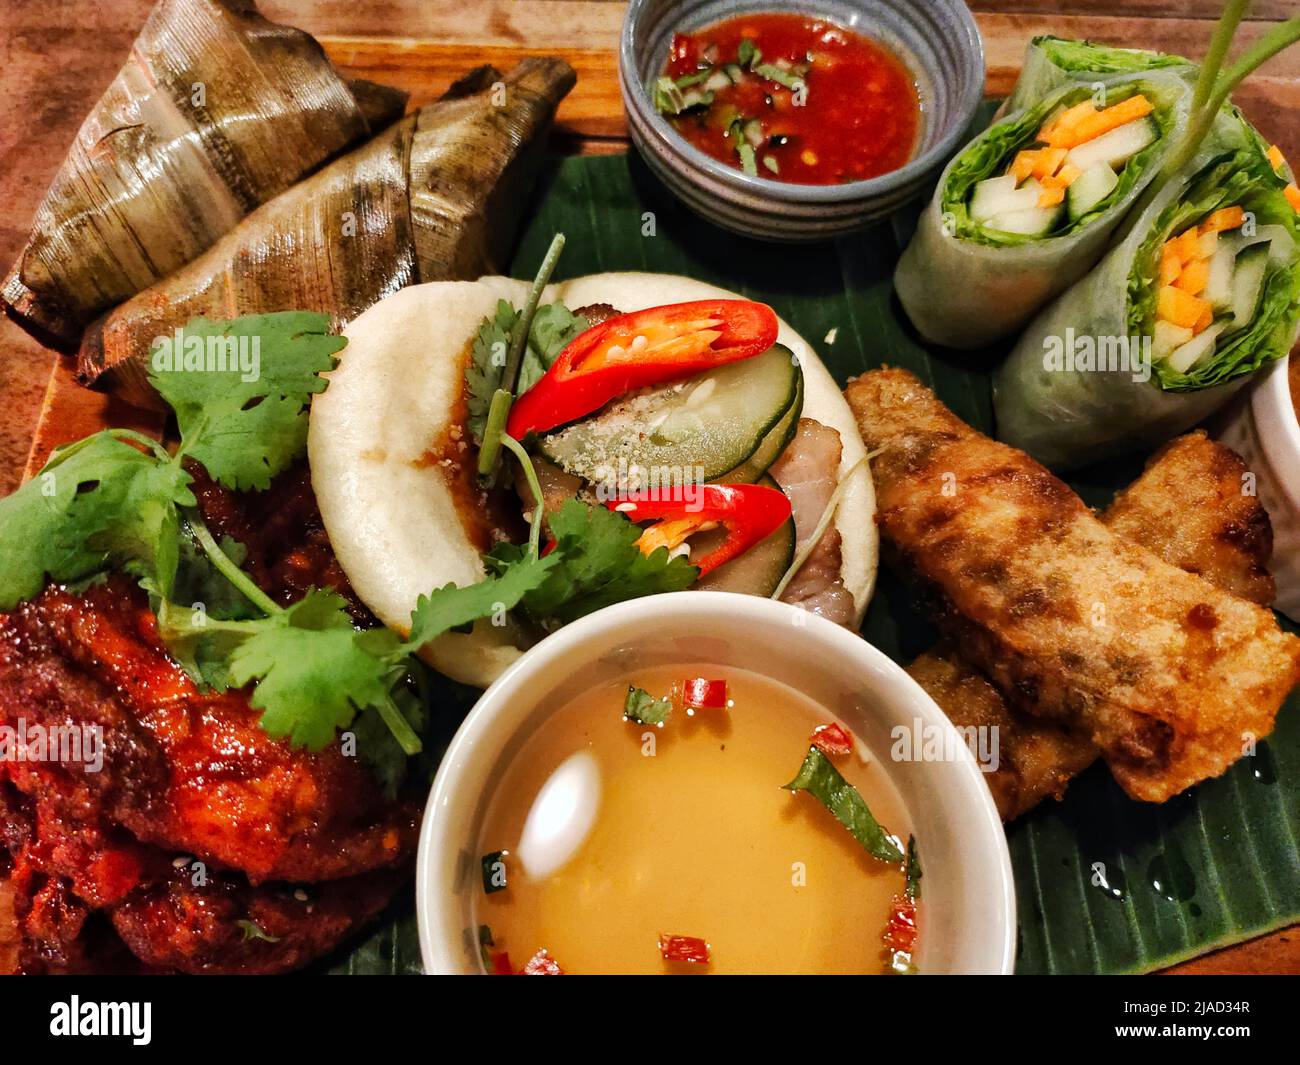 Overhead view of spring rolls, Summer rolls, rice parcels, pork bao bunds and chili sauce Stock Photo